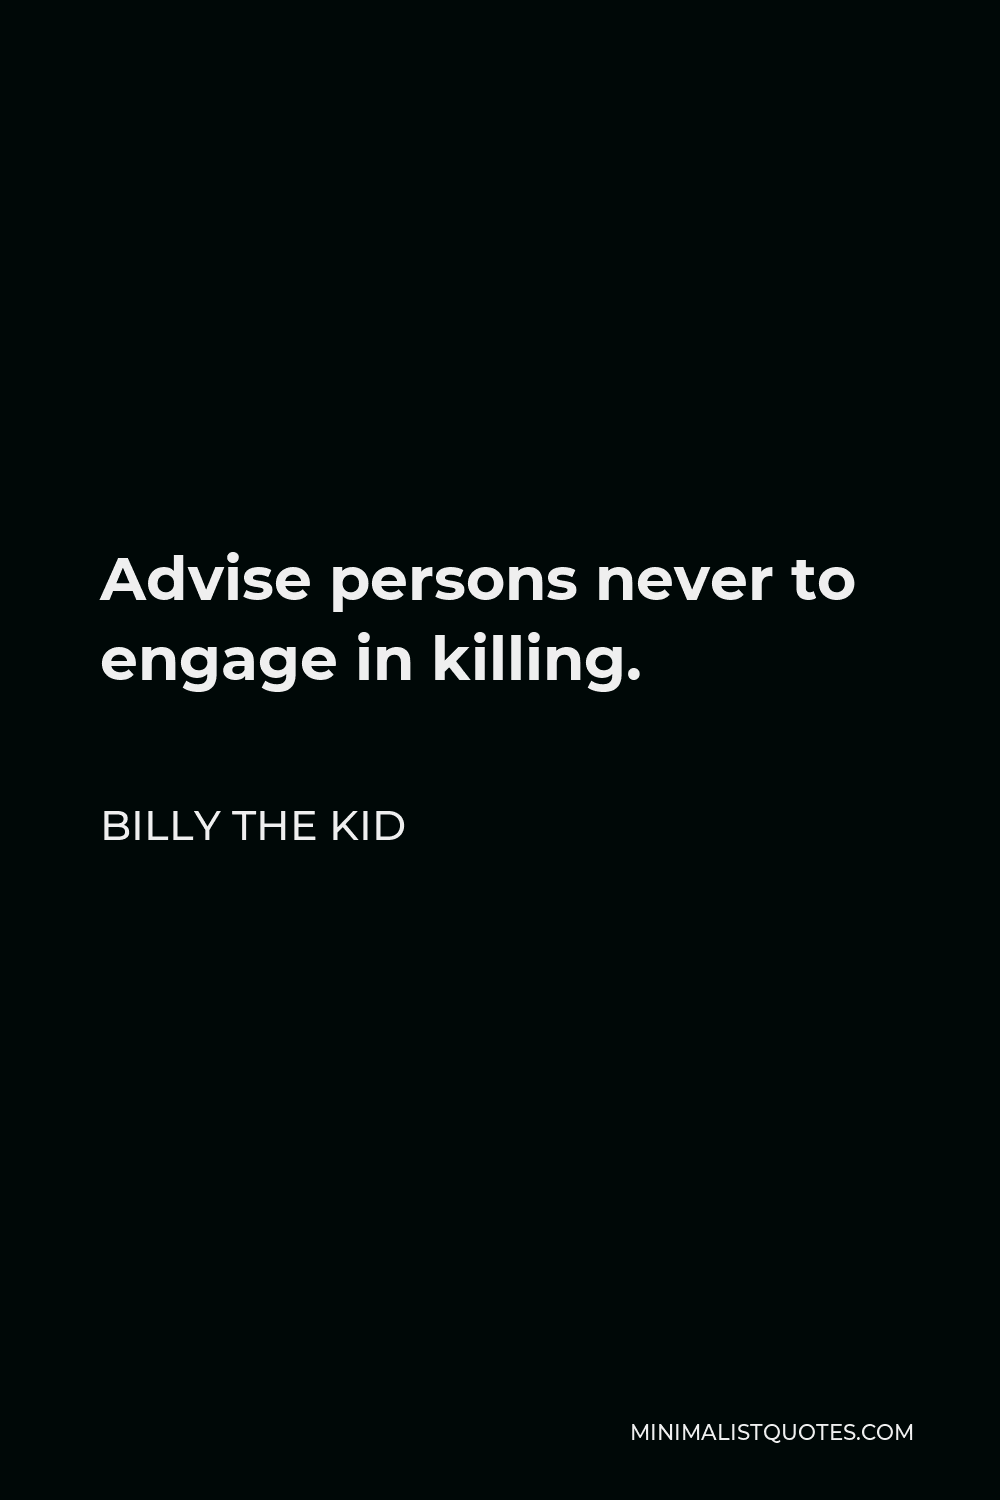 Billy the Kid Quote - Advise persons never to engage in killing.